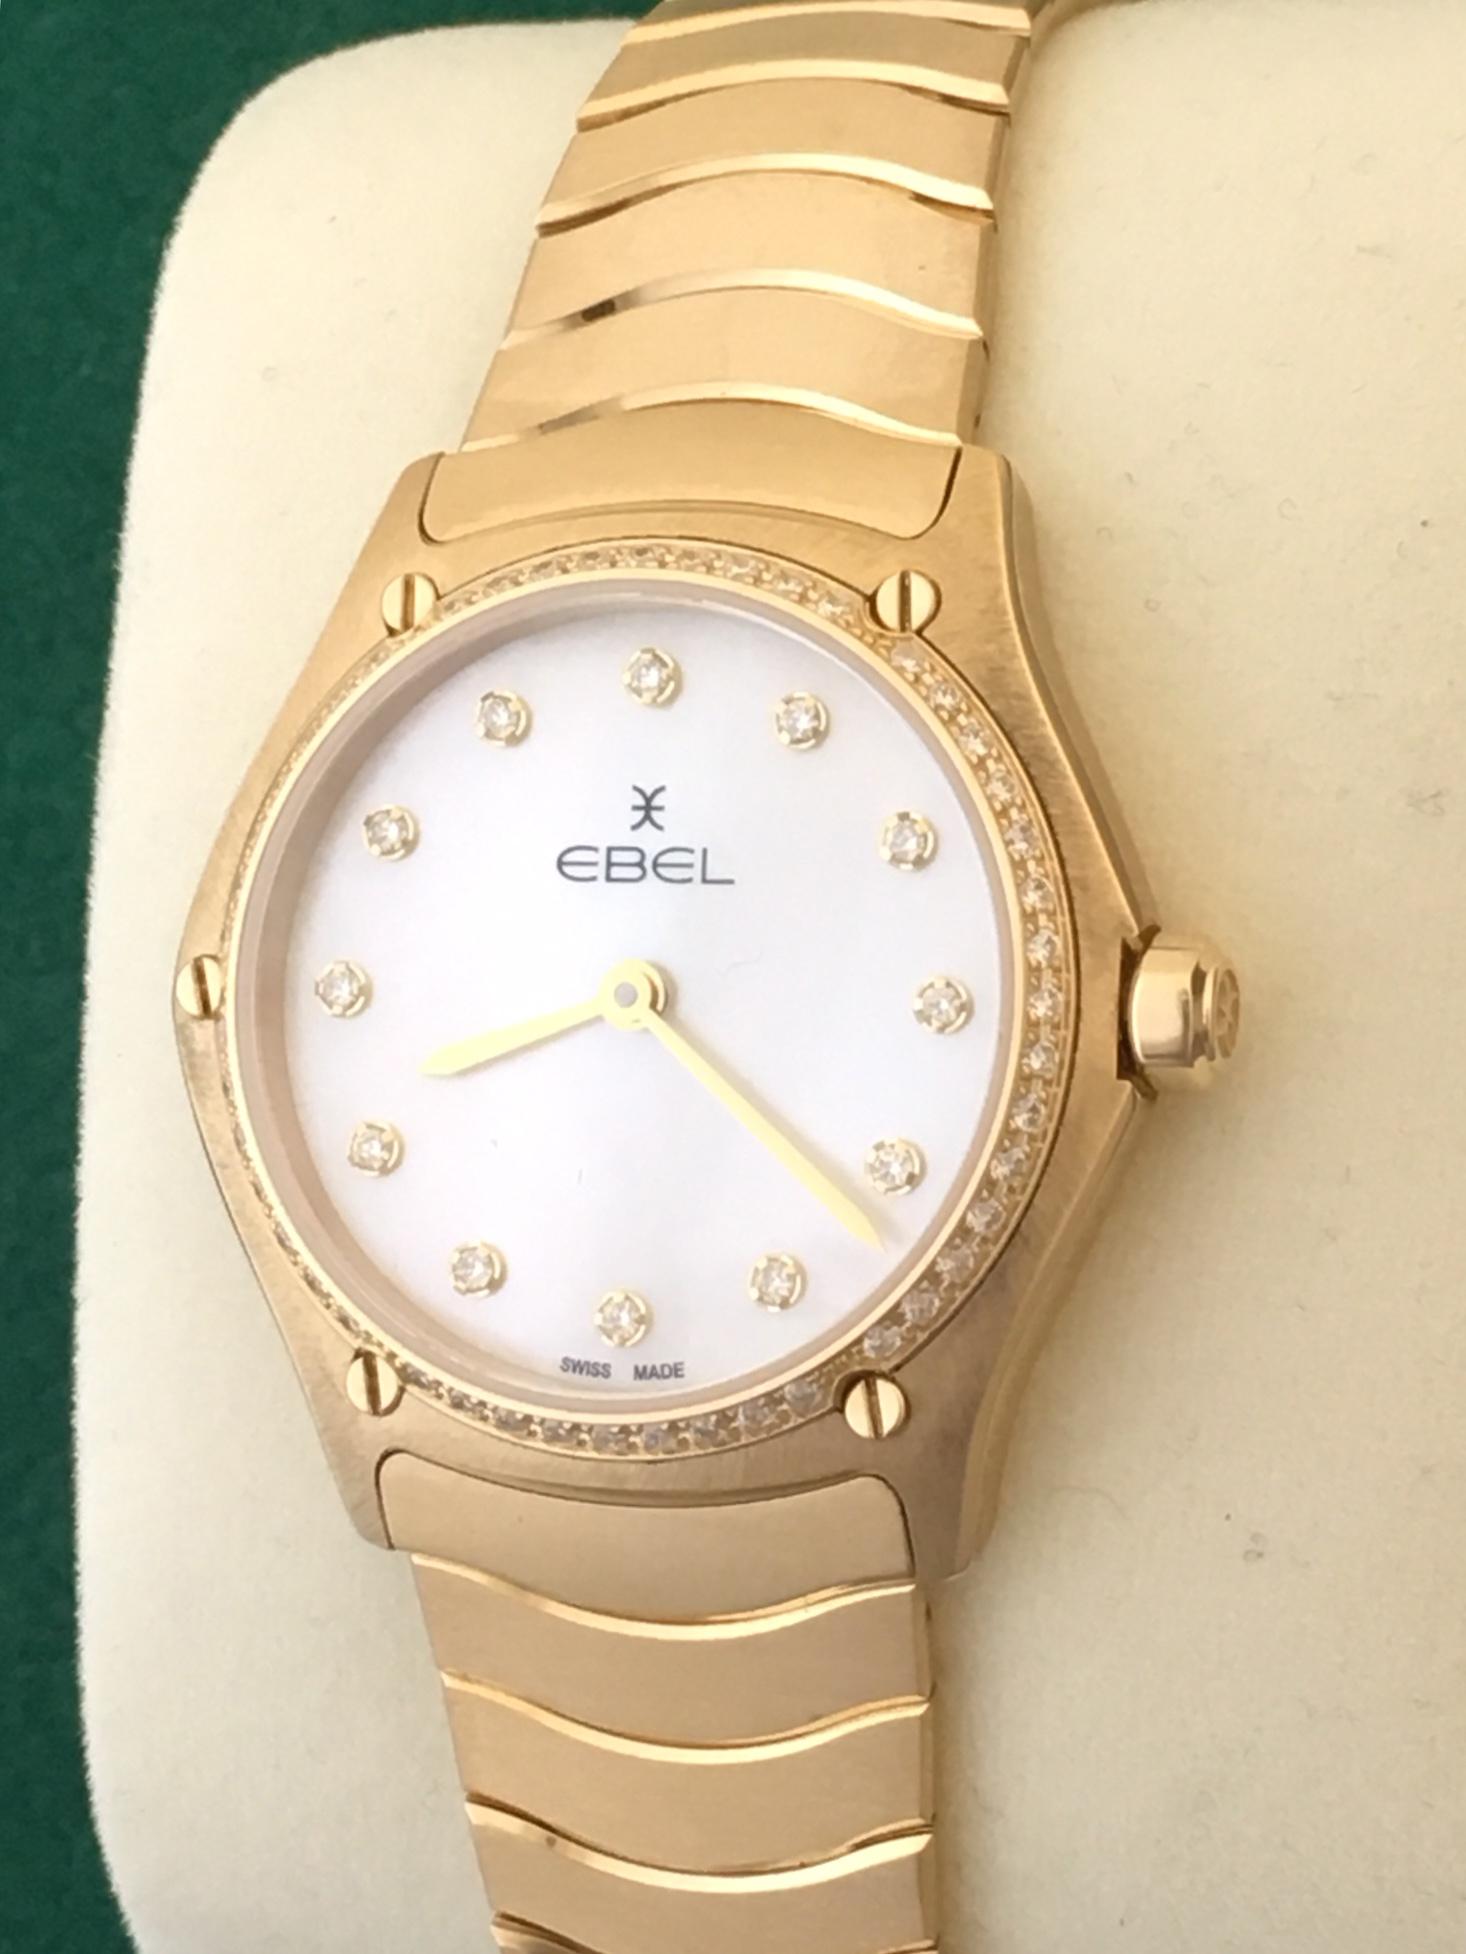 Women's EBEL Sport Classic Midsize 18K yellow gold case with full factory Ebel Diamond bezel, white mother-of-pearl dial with 12 diamonds as hour markers, sapphire crystal with anti reflective treatment underneath, two-tone stainless steel wave link